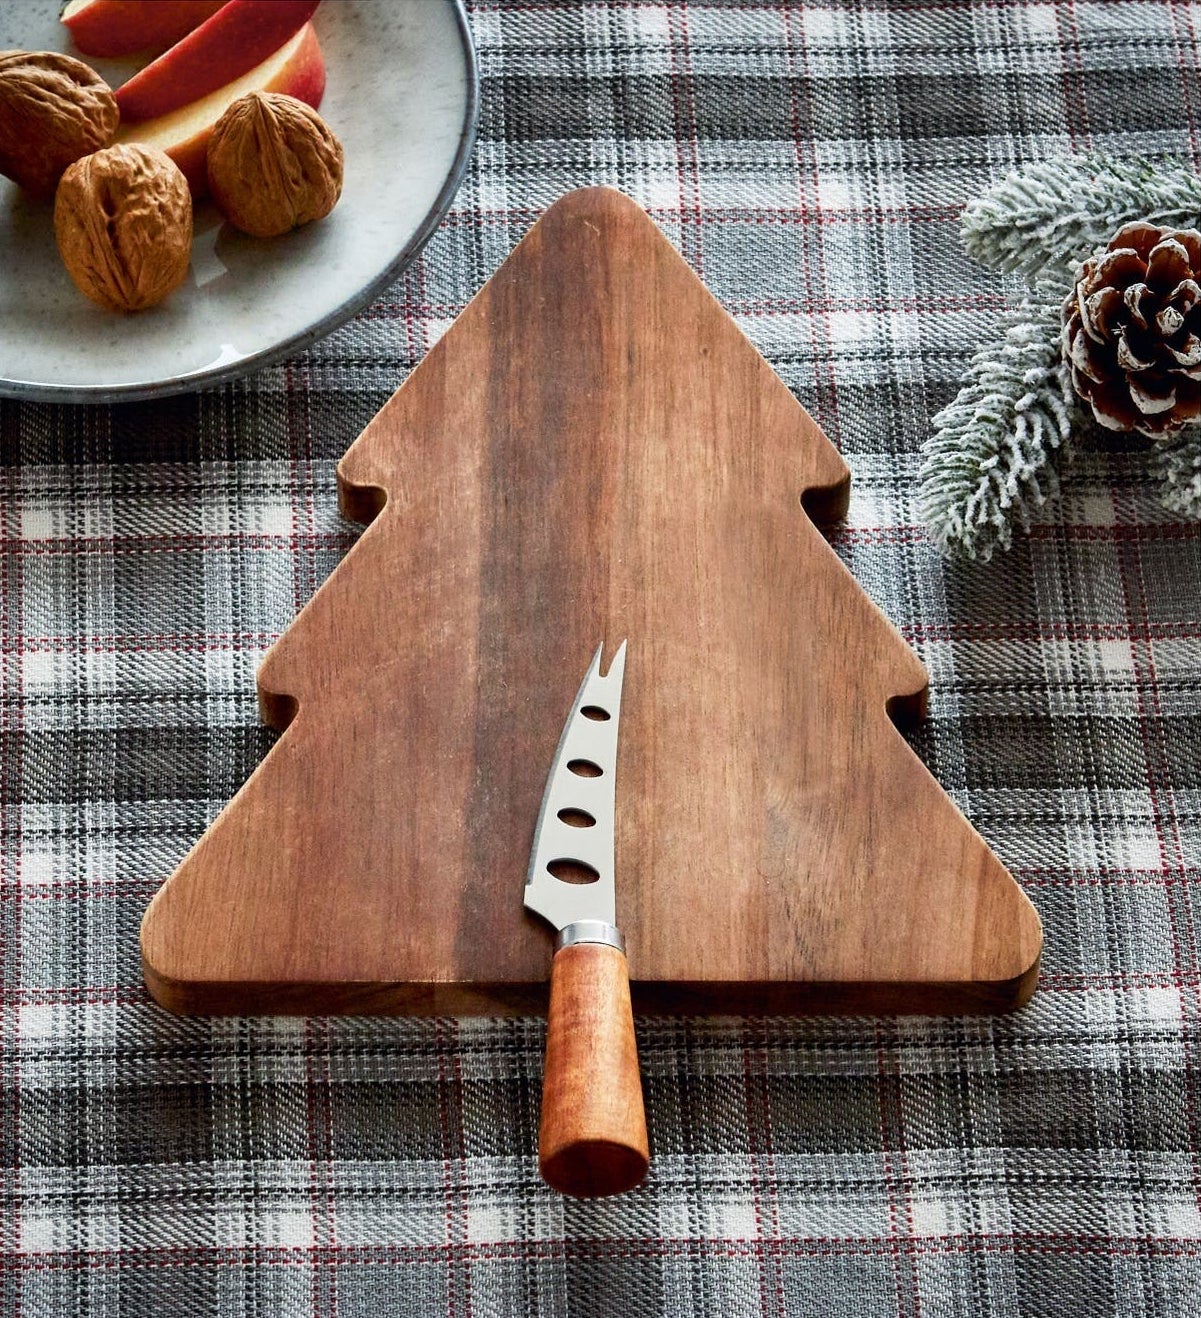 The Christmas tree-shaped cutting board with a cheese knife with wood handle sitting on it